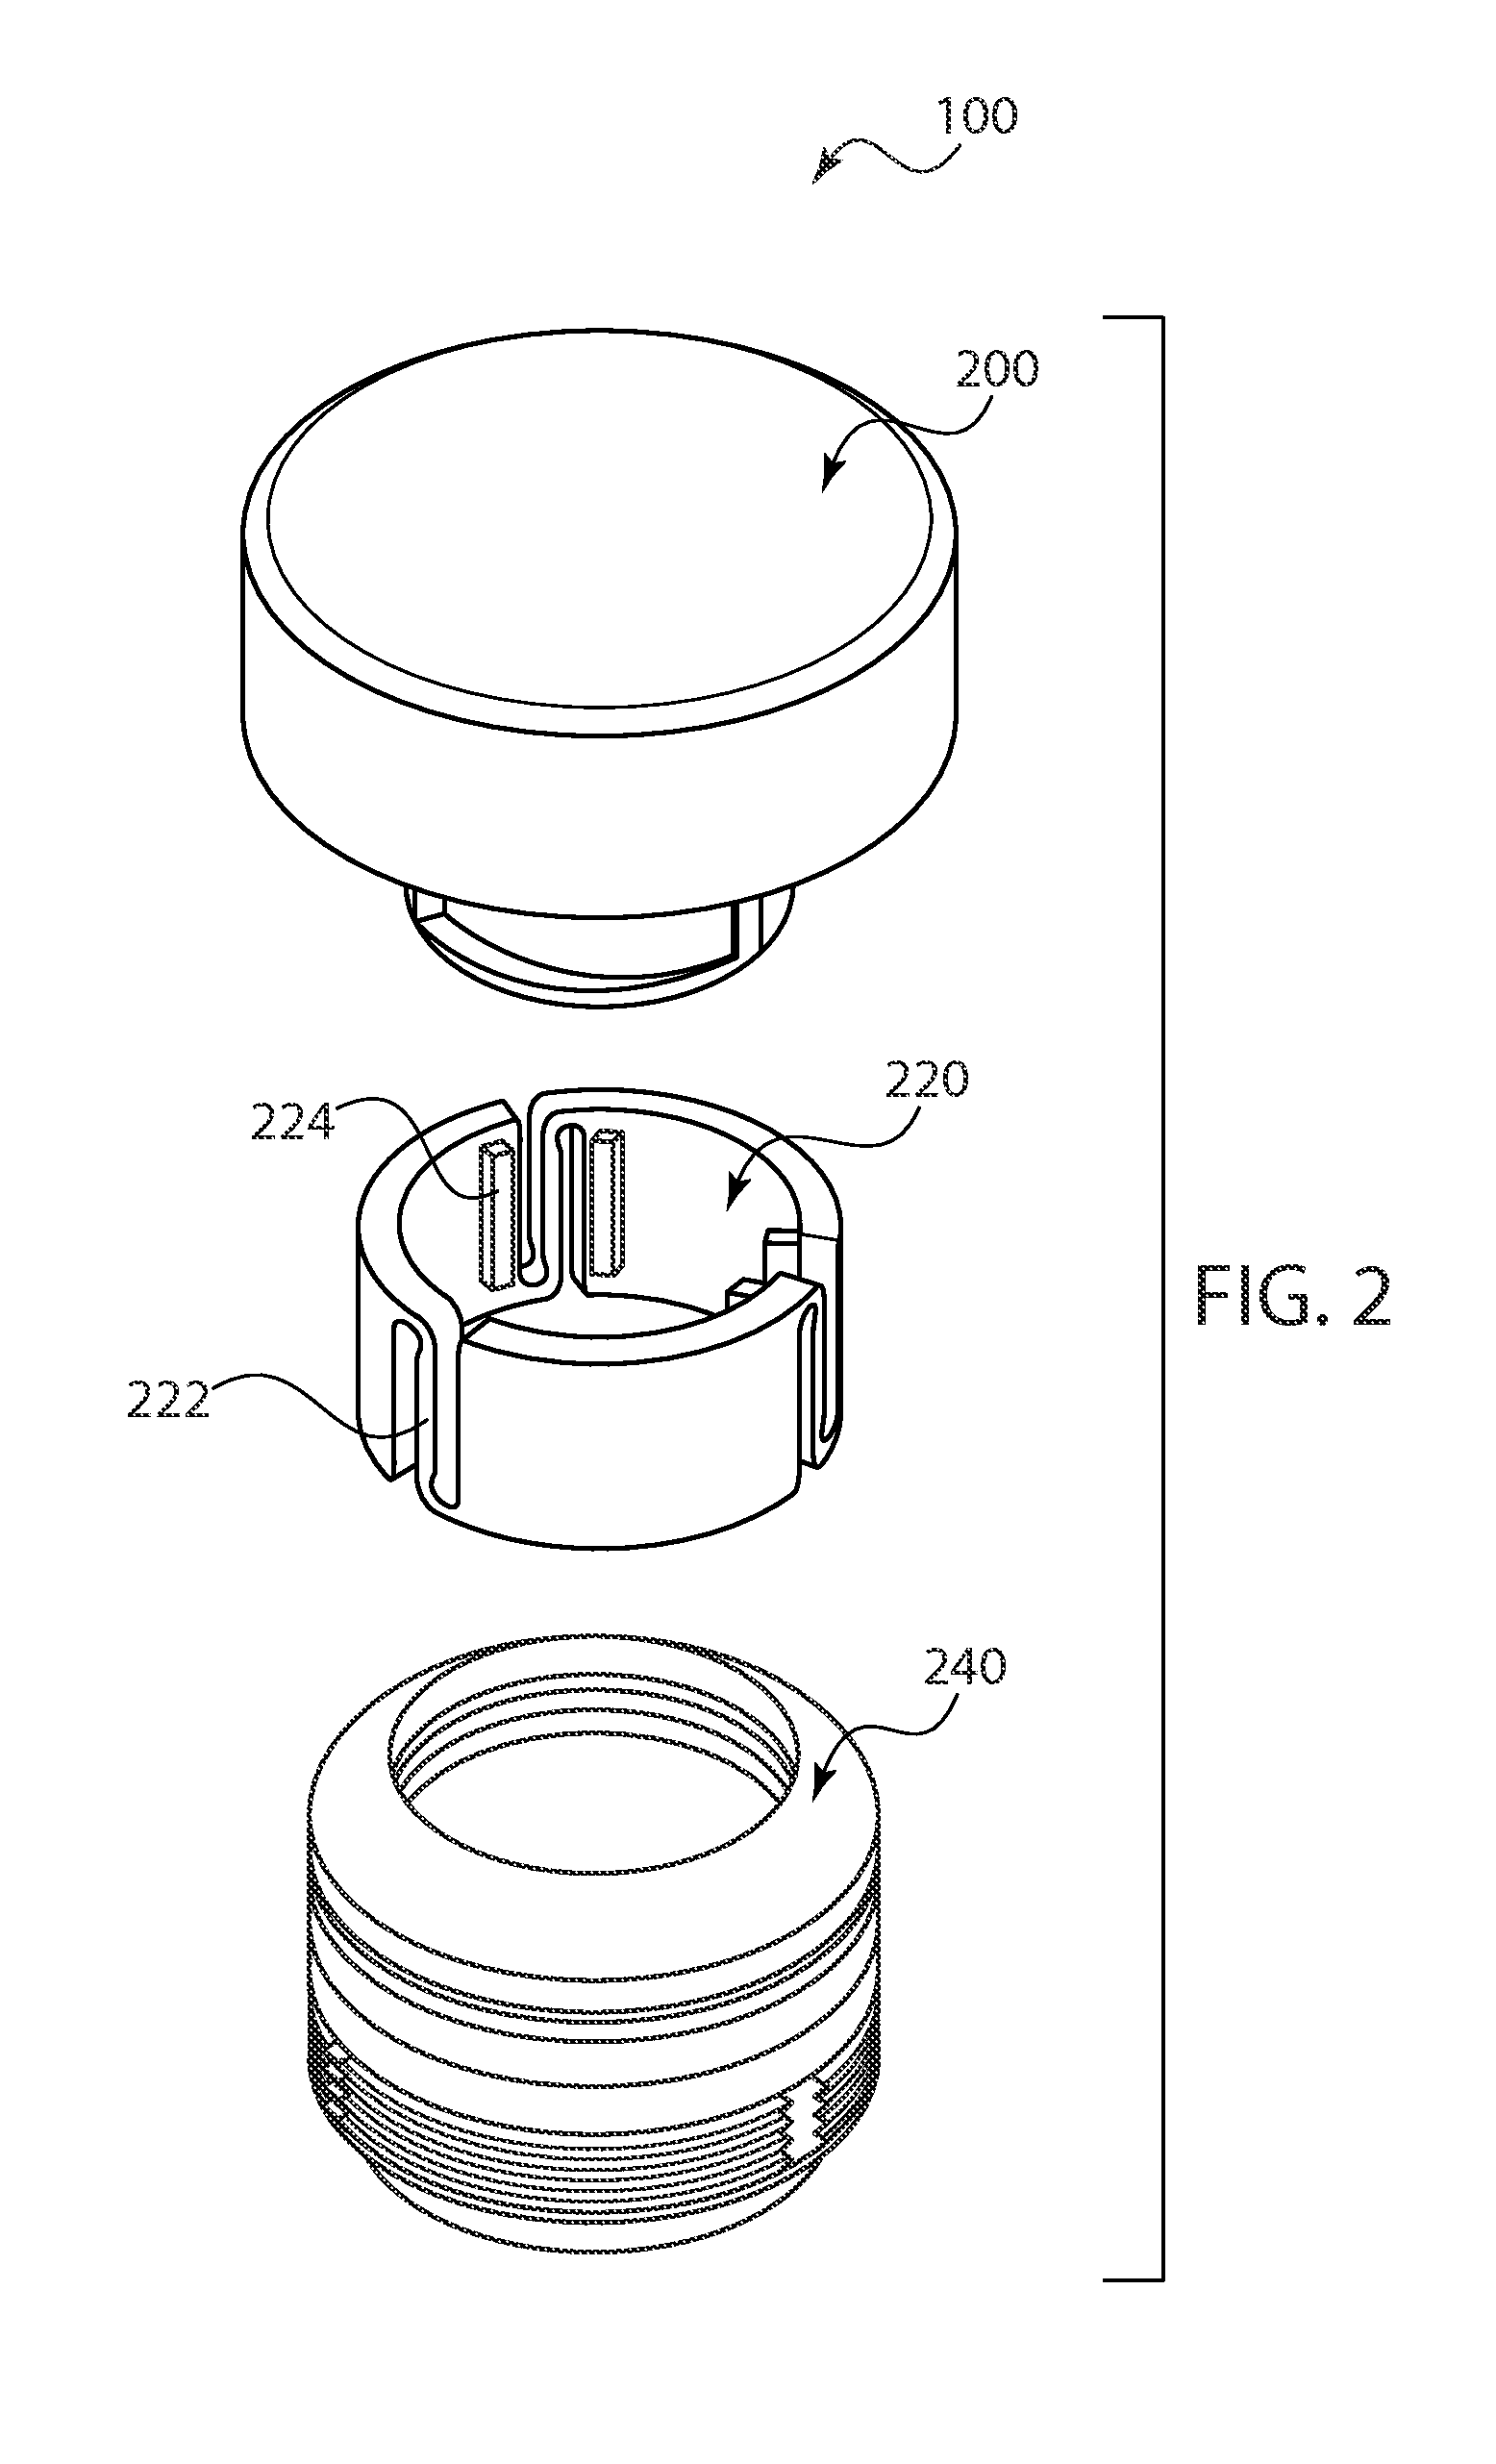 Expanding sealing locking systems and methods